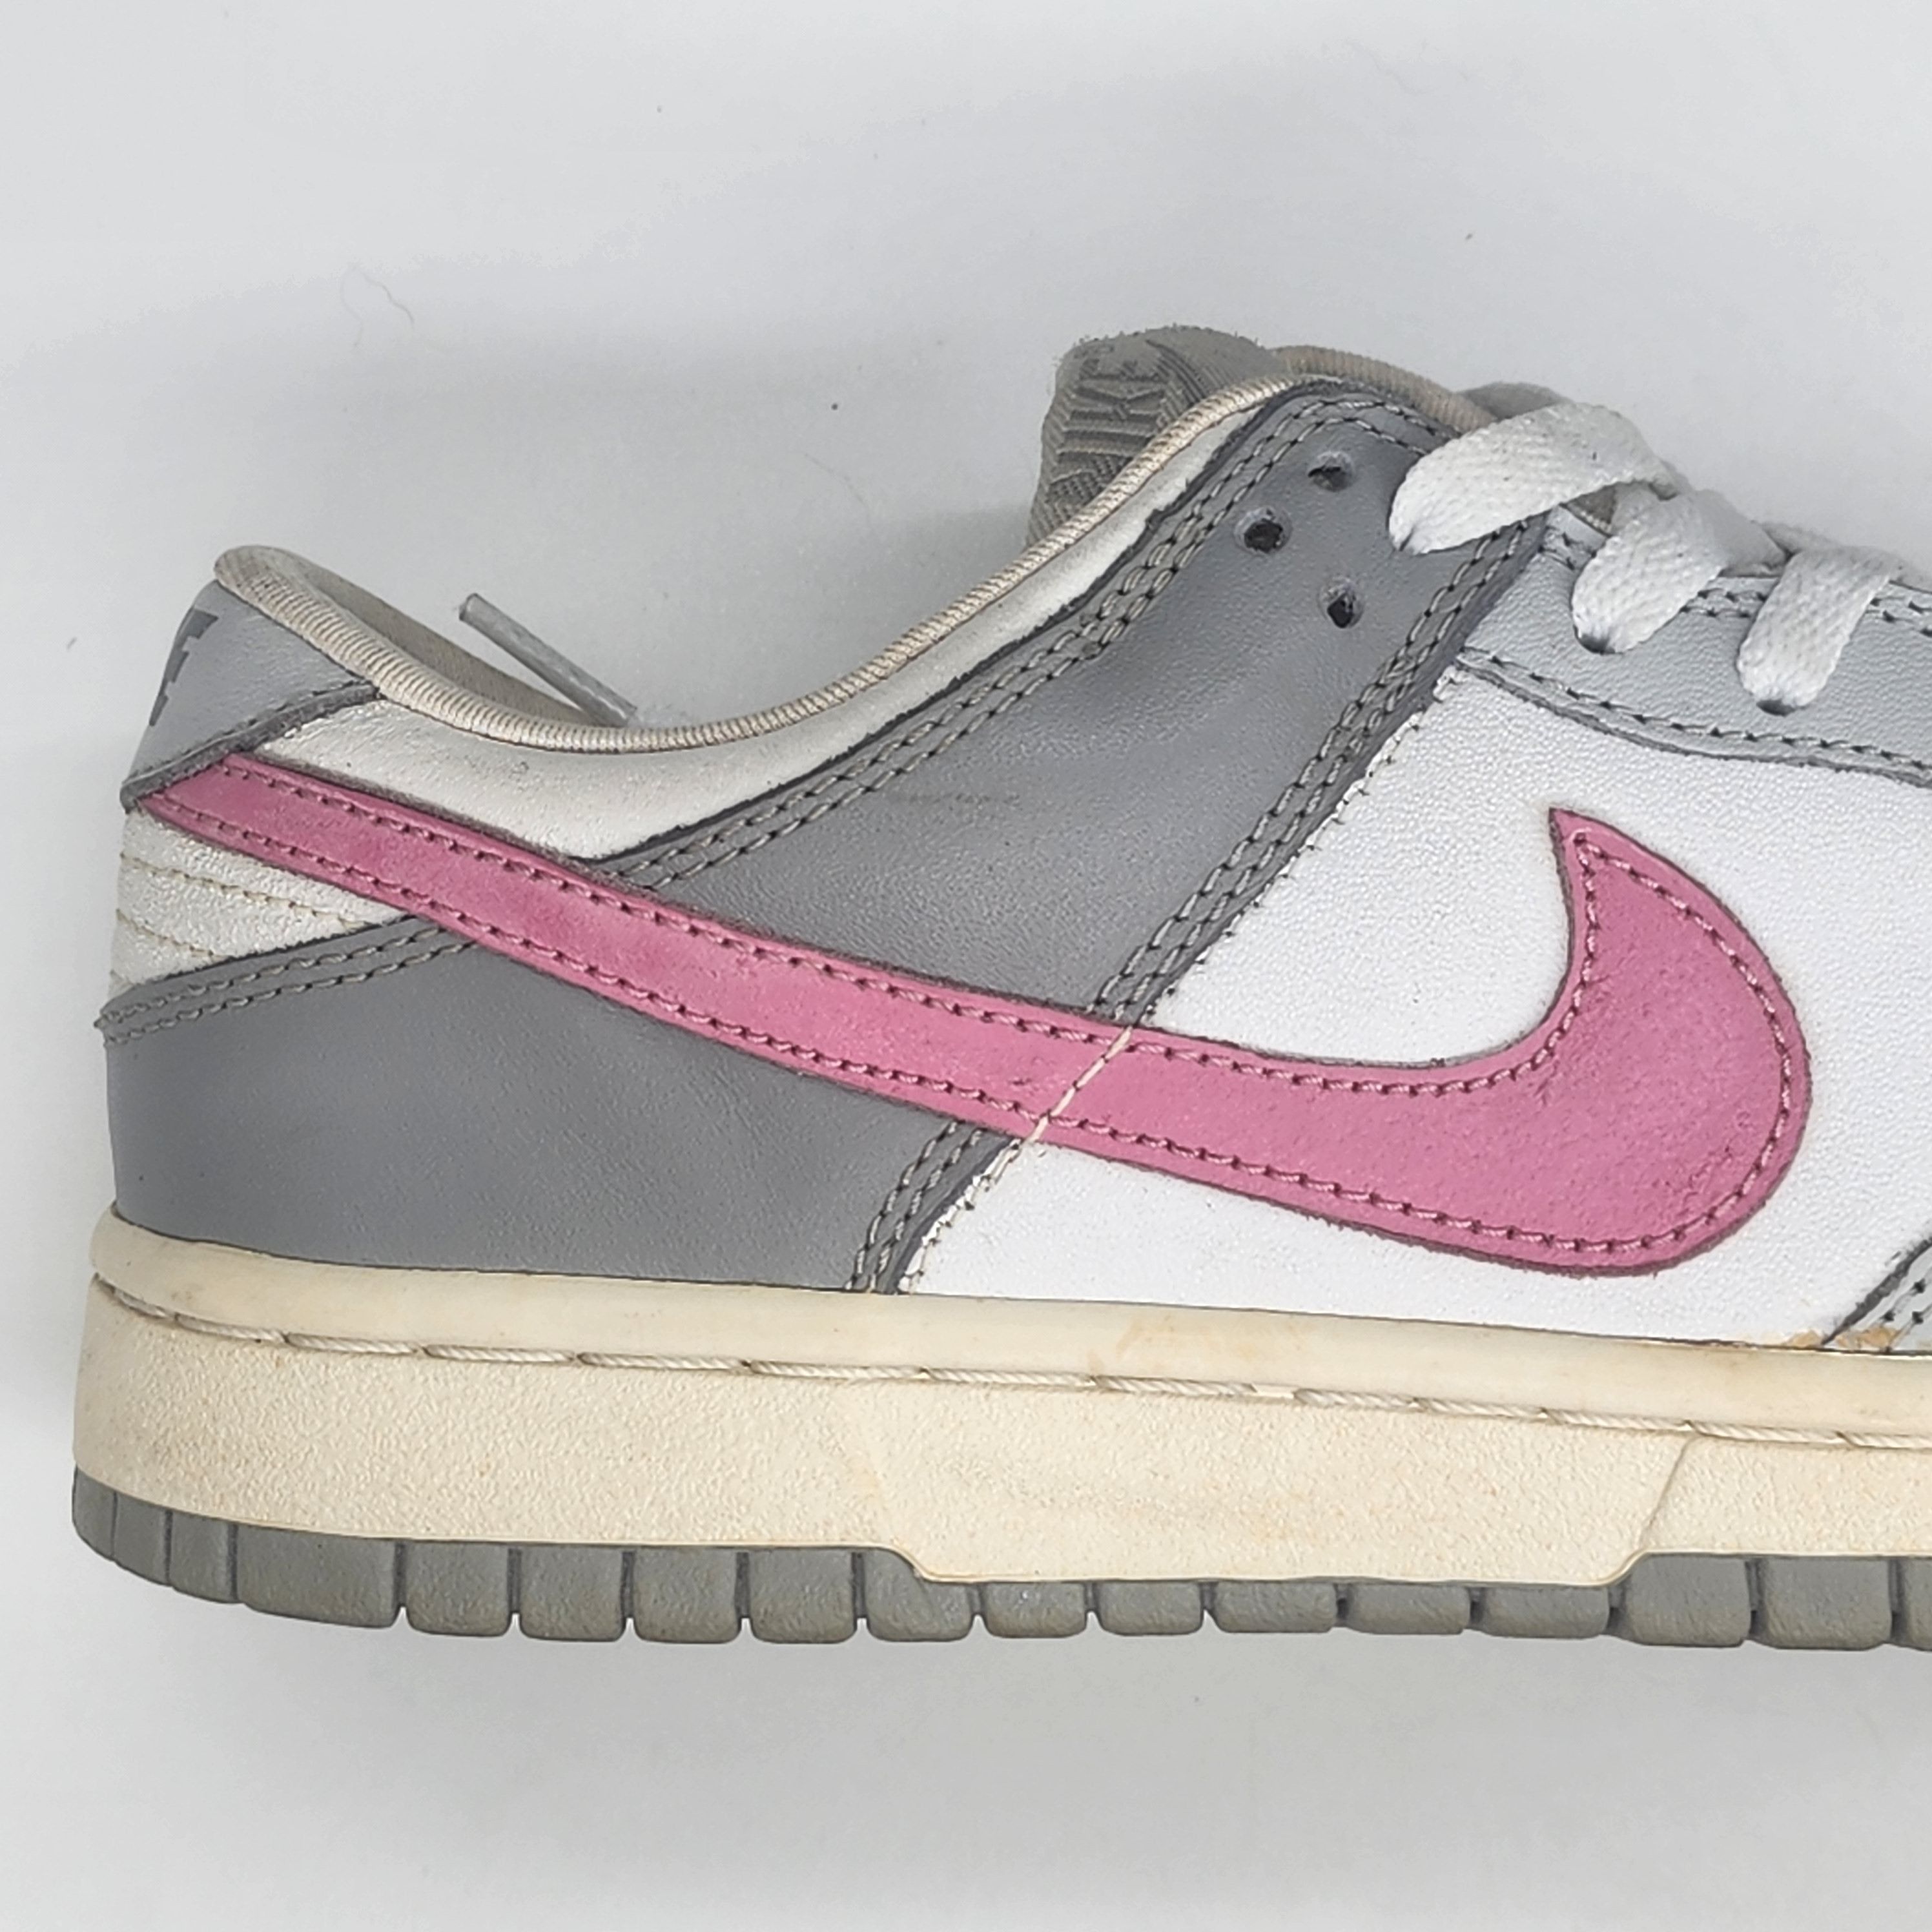 Nike - 2004 W's Dunk Low Pro Pink Neutral Gray - 14